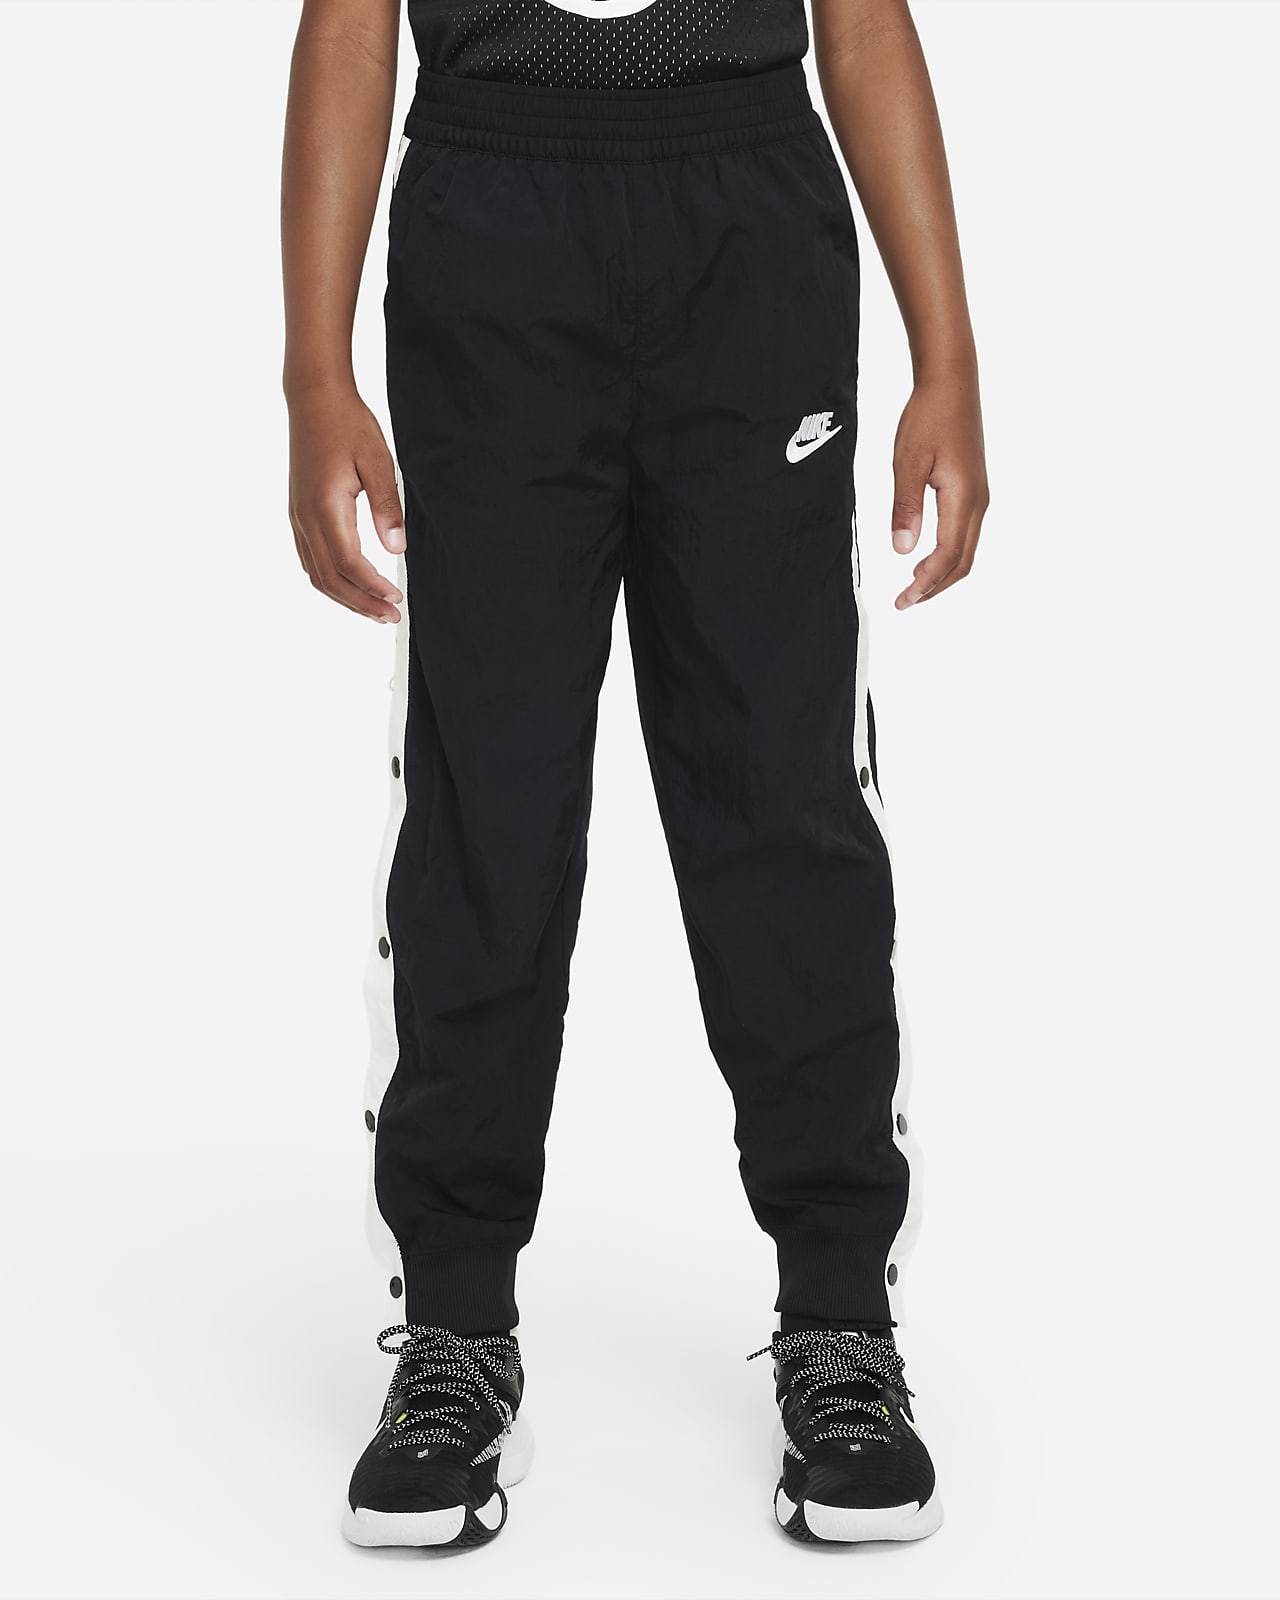 Top more than 138 nike youth pants latest - in.eteachers